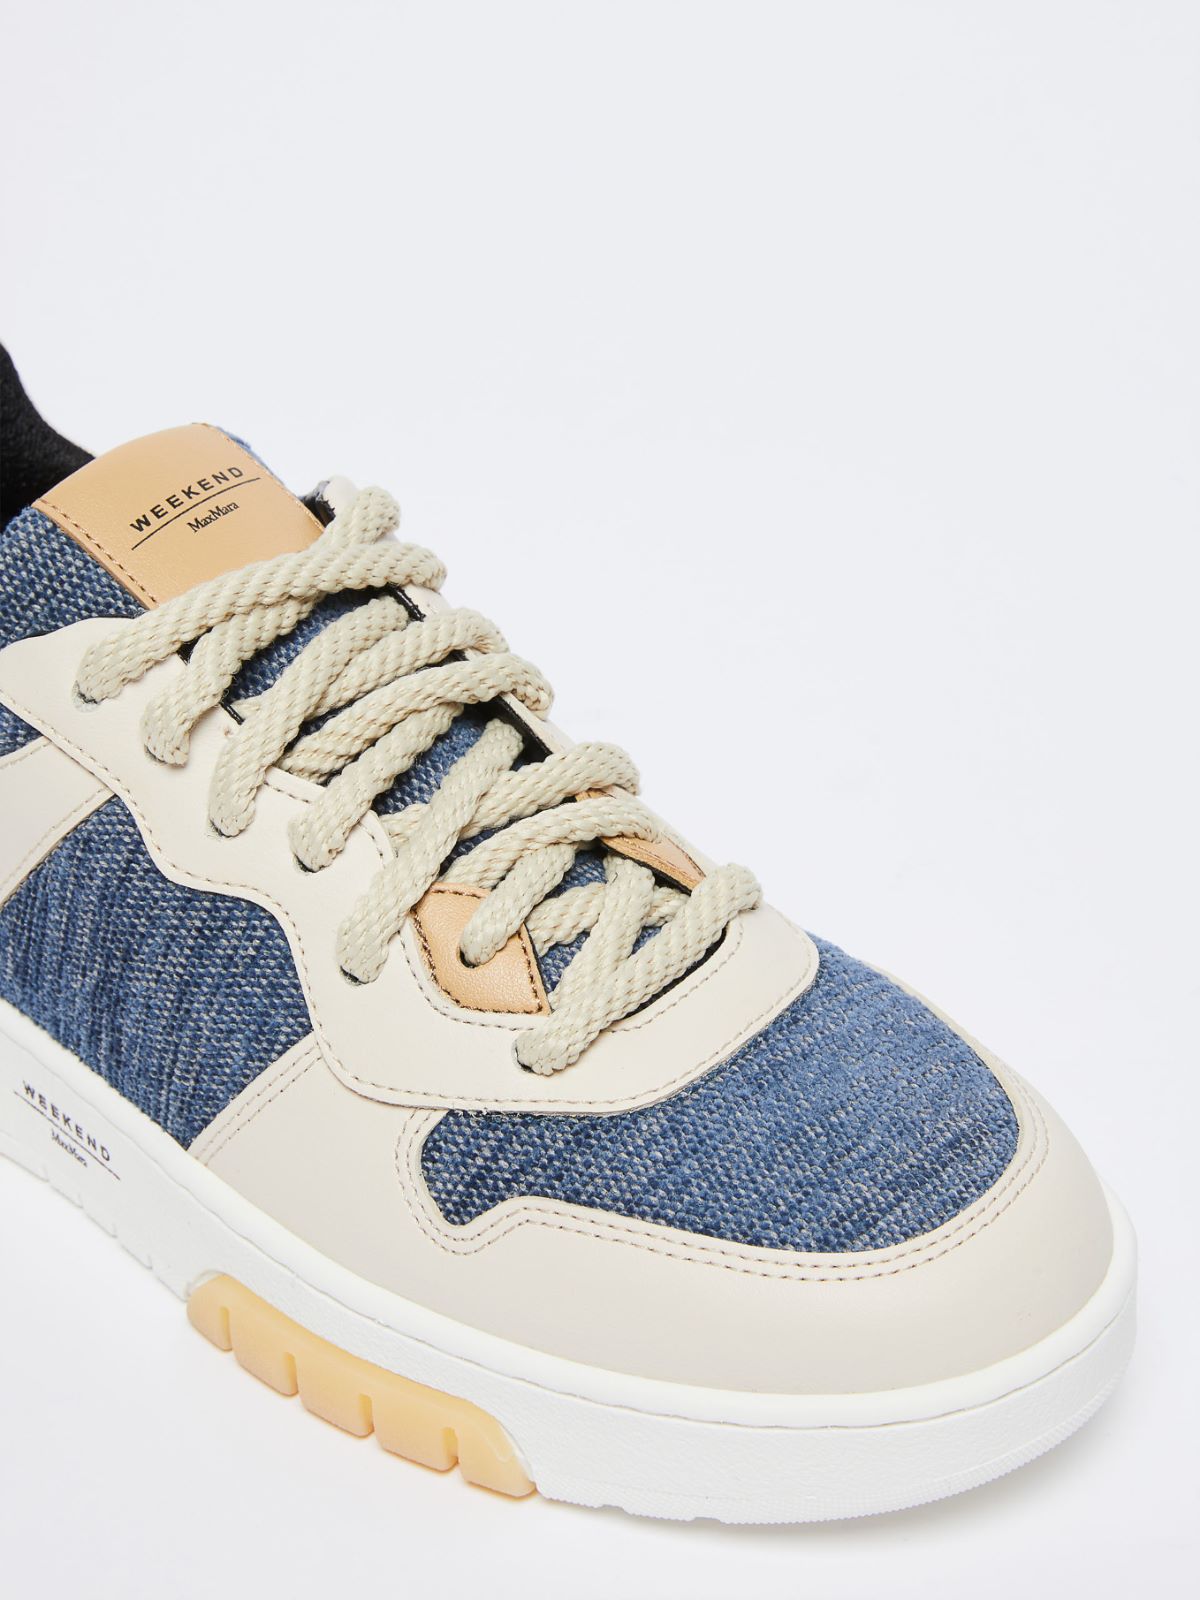 Cotton and leather sneakers - AVIO - Weekend Max Mara - 4